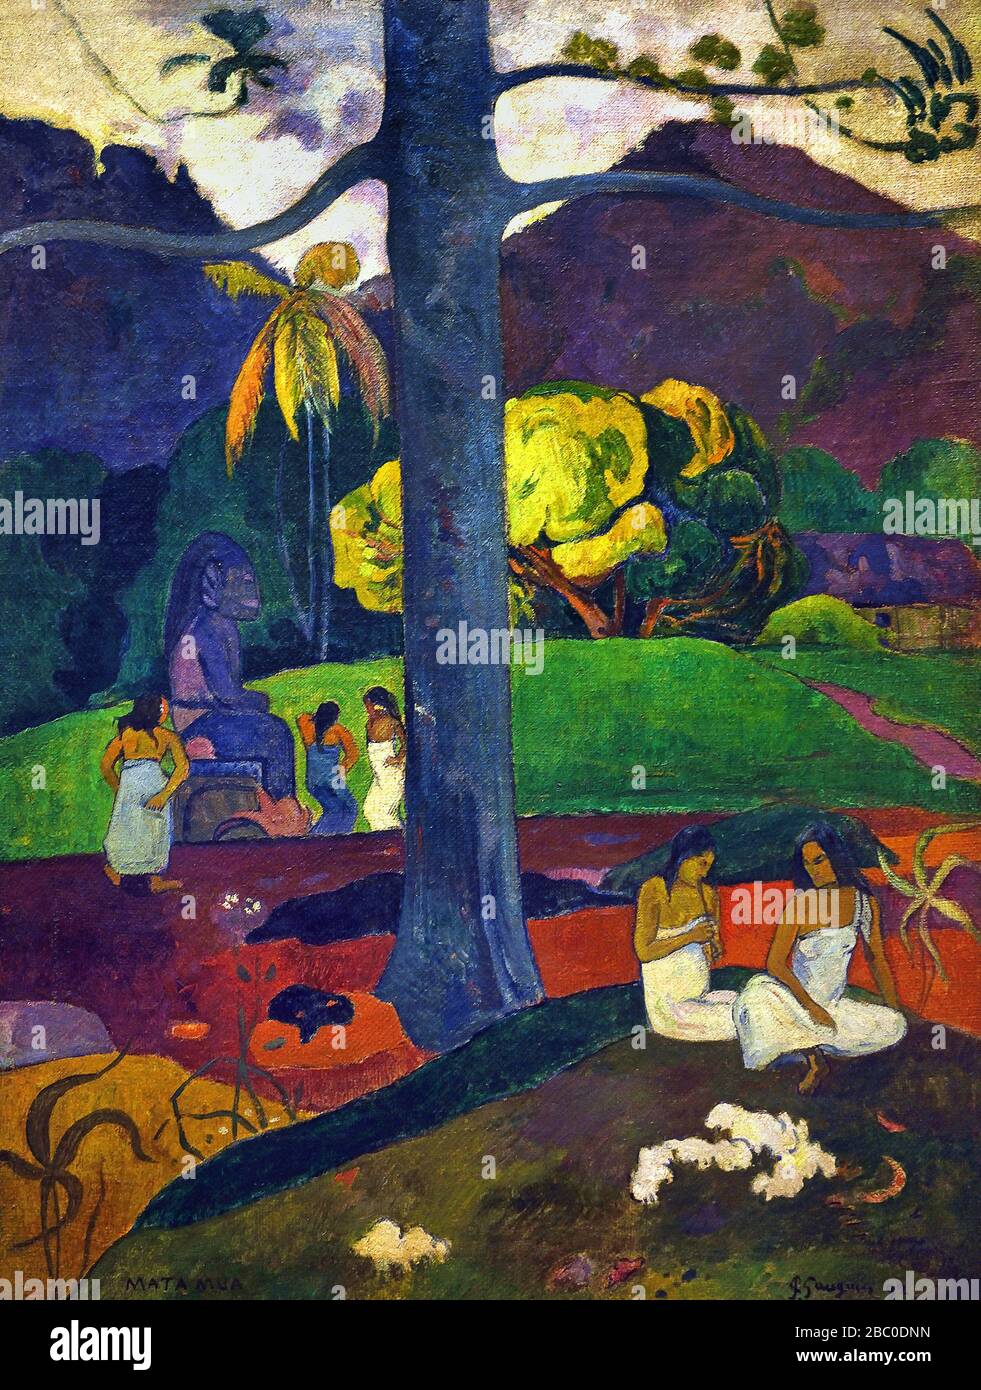 Muta Mua (In olden Times) 1892 Paul Gauguin - Eugène Henri Paul Gauguin 1848 – 1903 was a French post-Impressionist artist, France. ( Died ,8 May 1903, Atuona, Marquesas Islands, French Polynesia ) Painter, Sculptor. Stock Photo